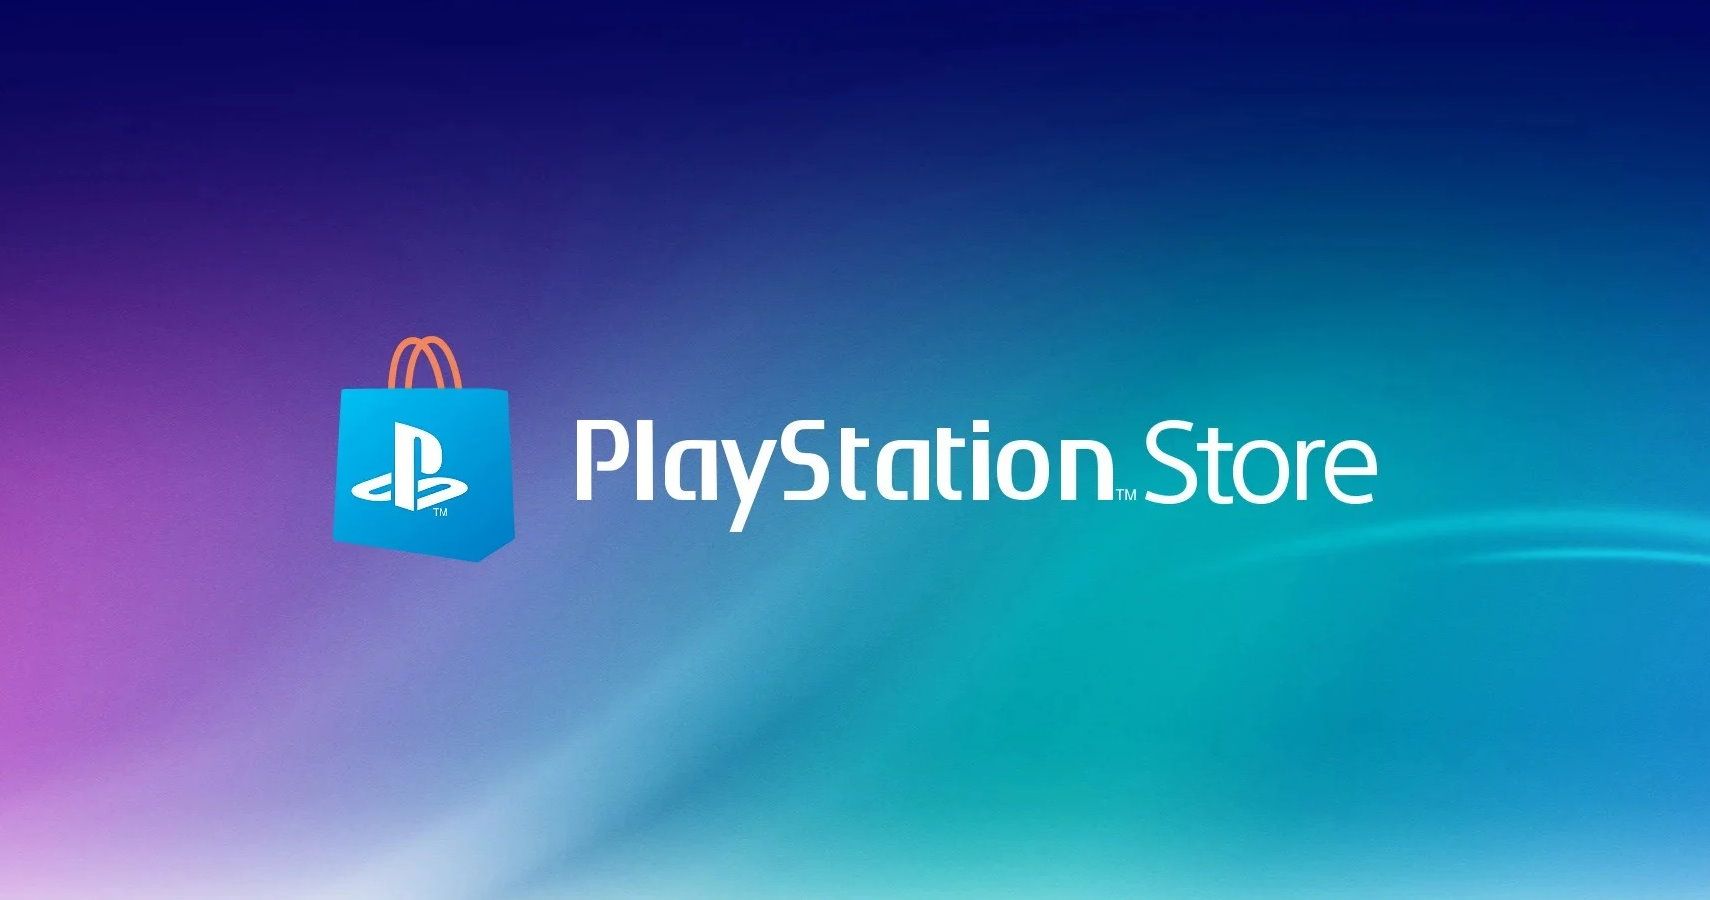 Sony is closing its PlayStation Store for PS3 in July and Vita in